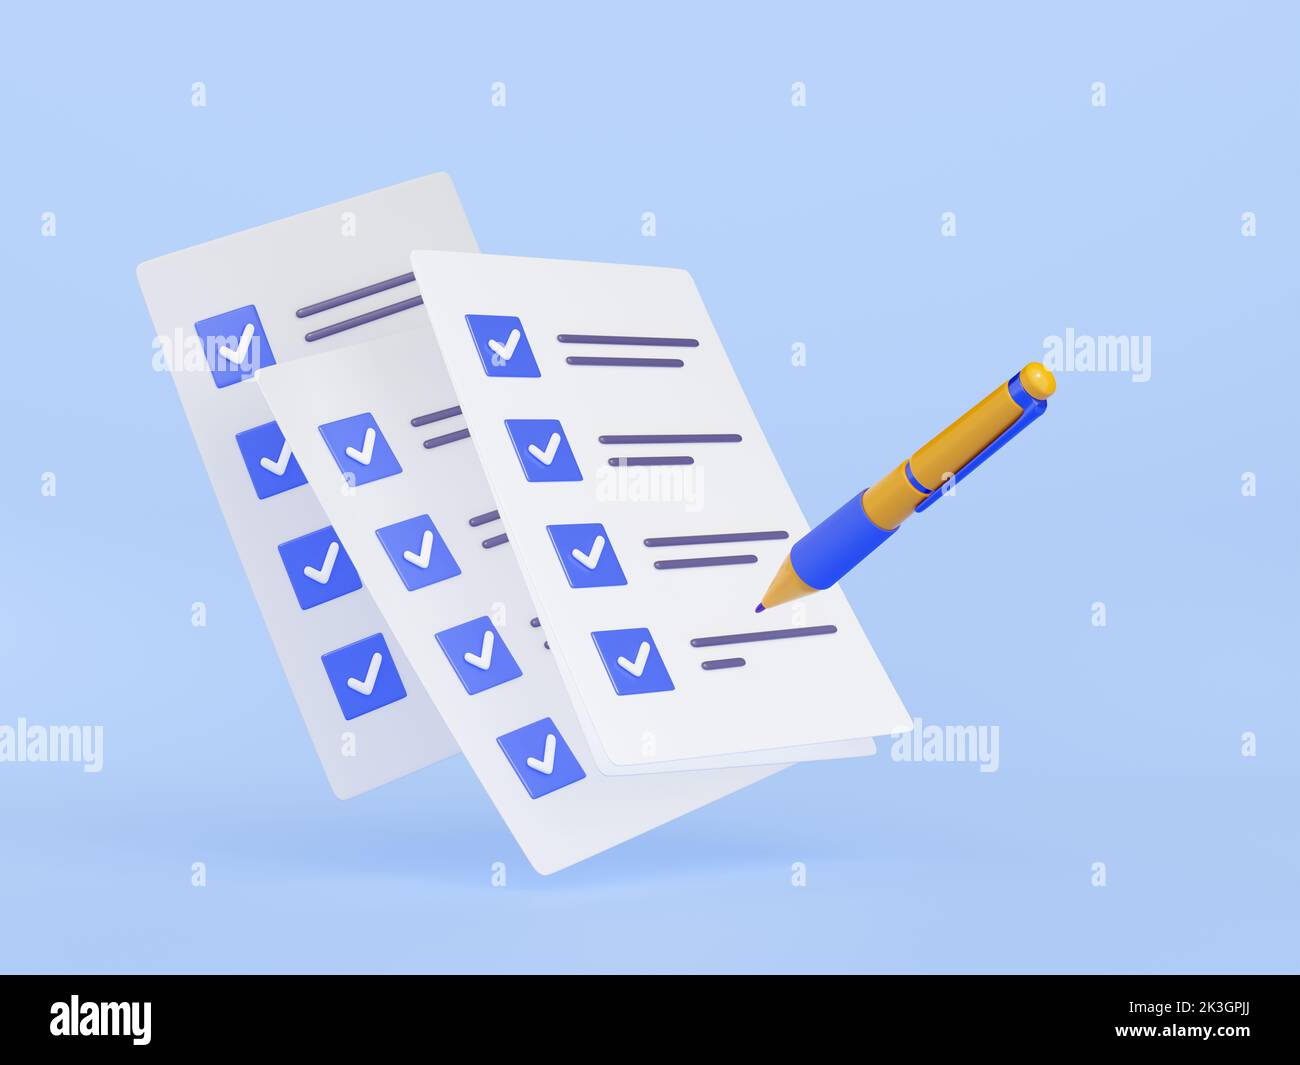 3D illustration of pen putting blue ticks on checklist papers. Election voting, successful fulfillment of business tasks, action plan for effective time management, quality control assessment form Stock Photo